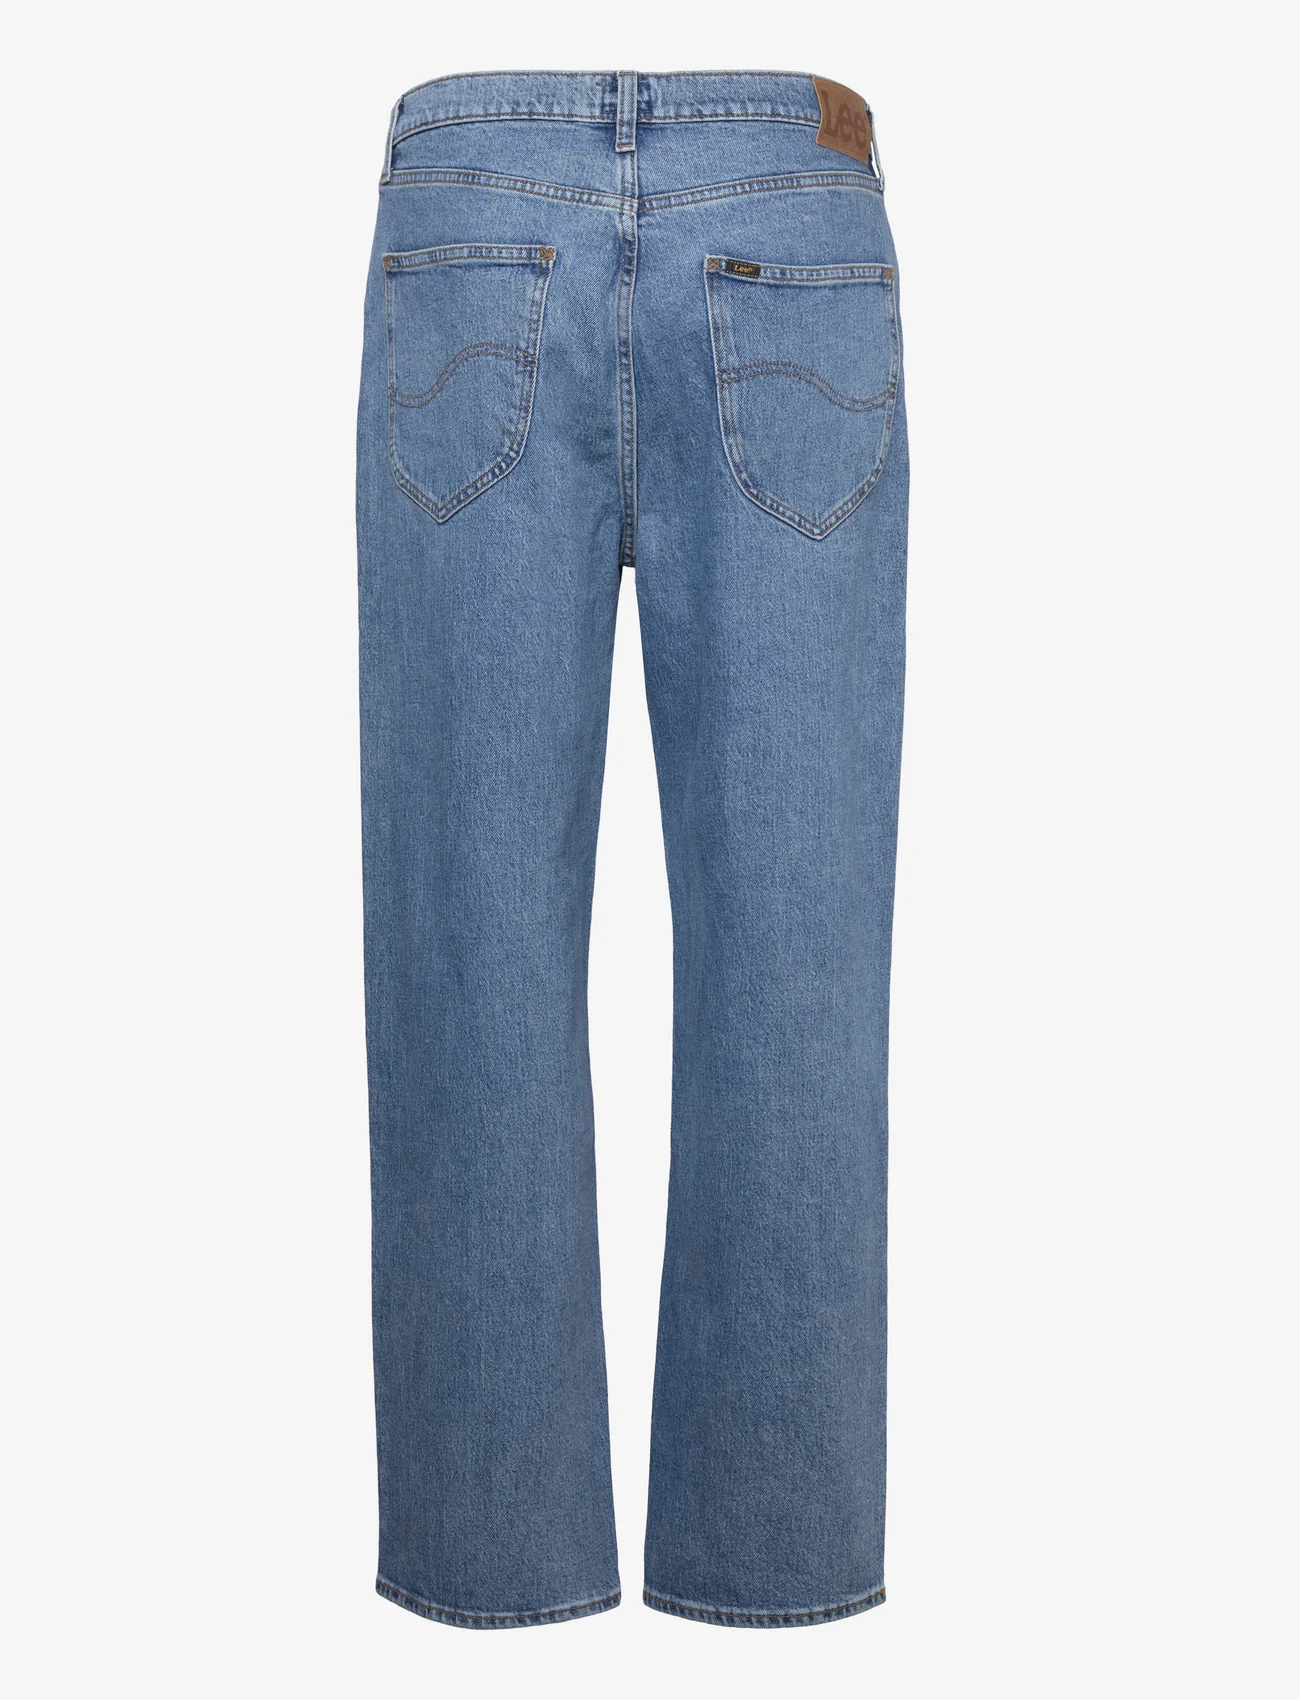 Lee Jeans - ASHER - relaxed jeans - badlands - 1